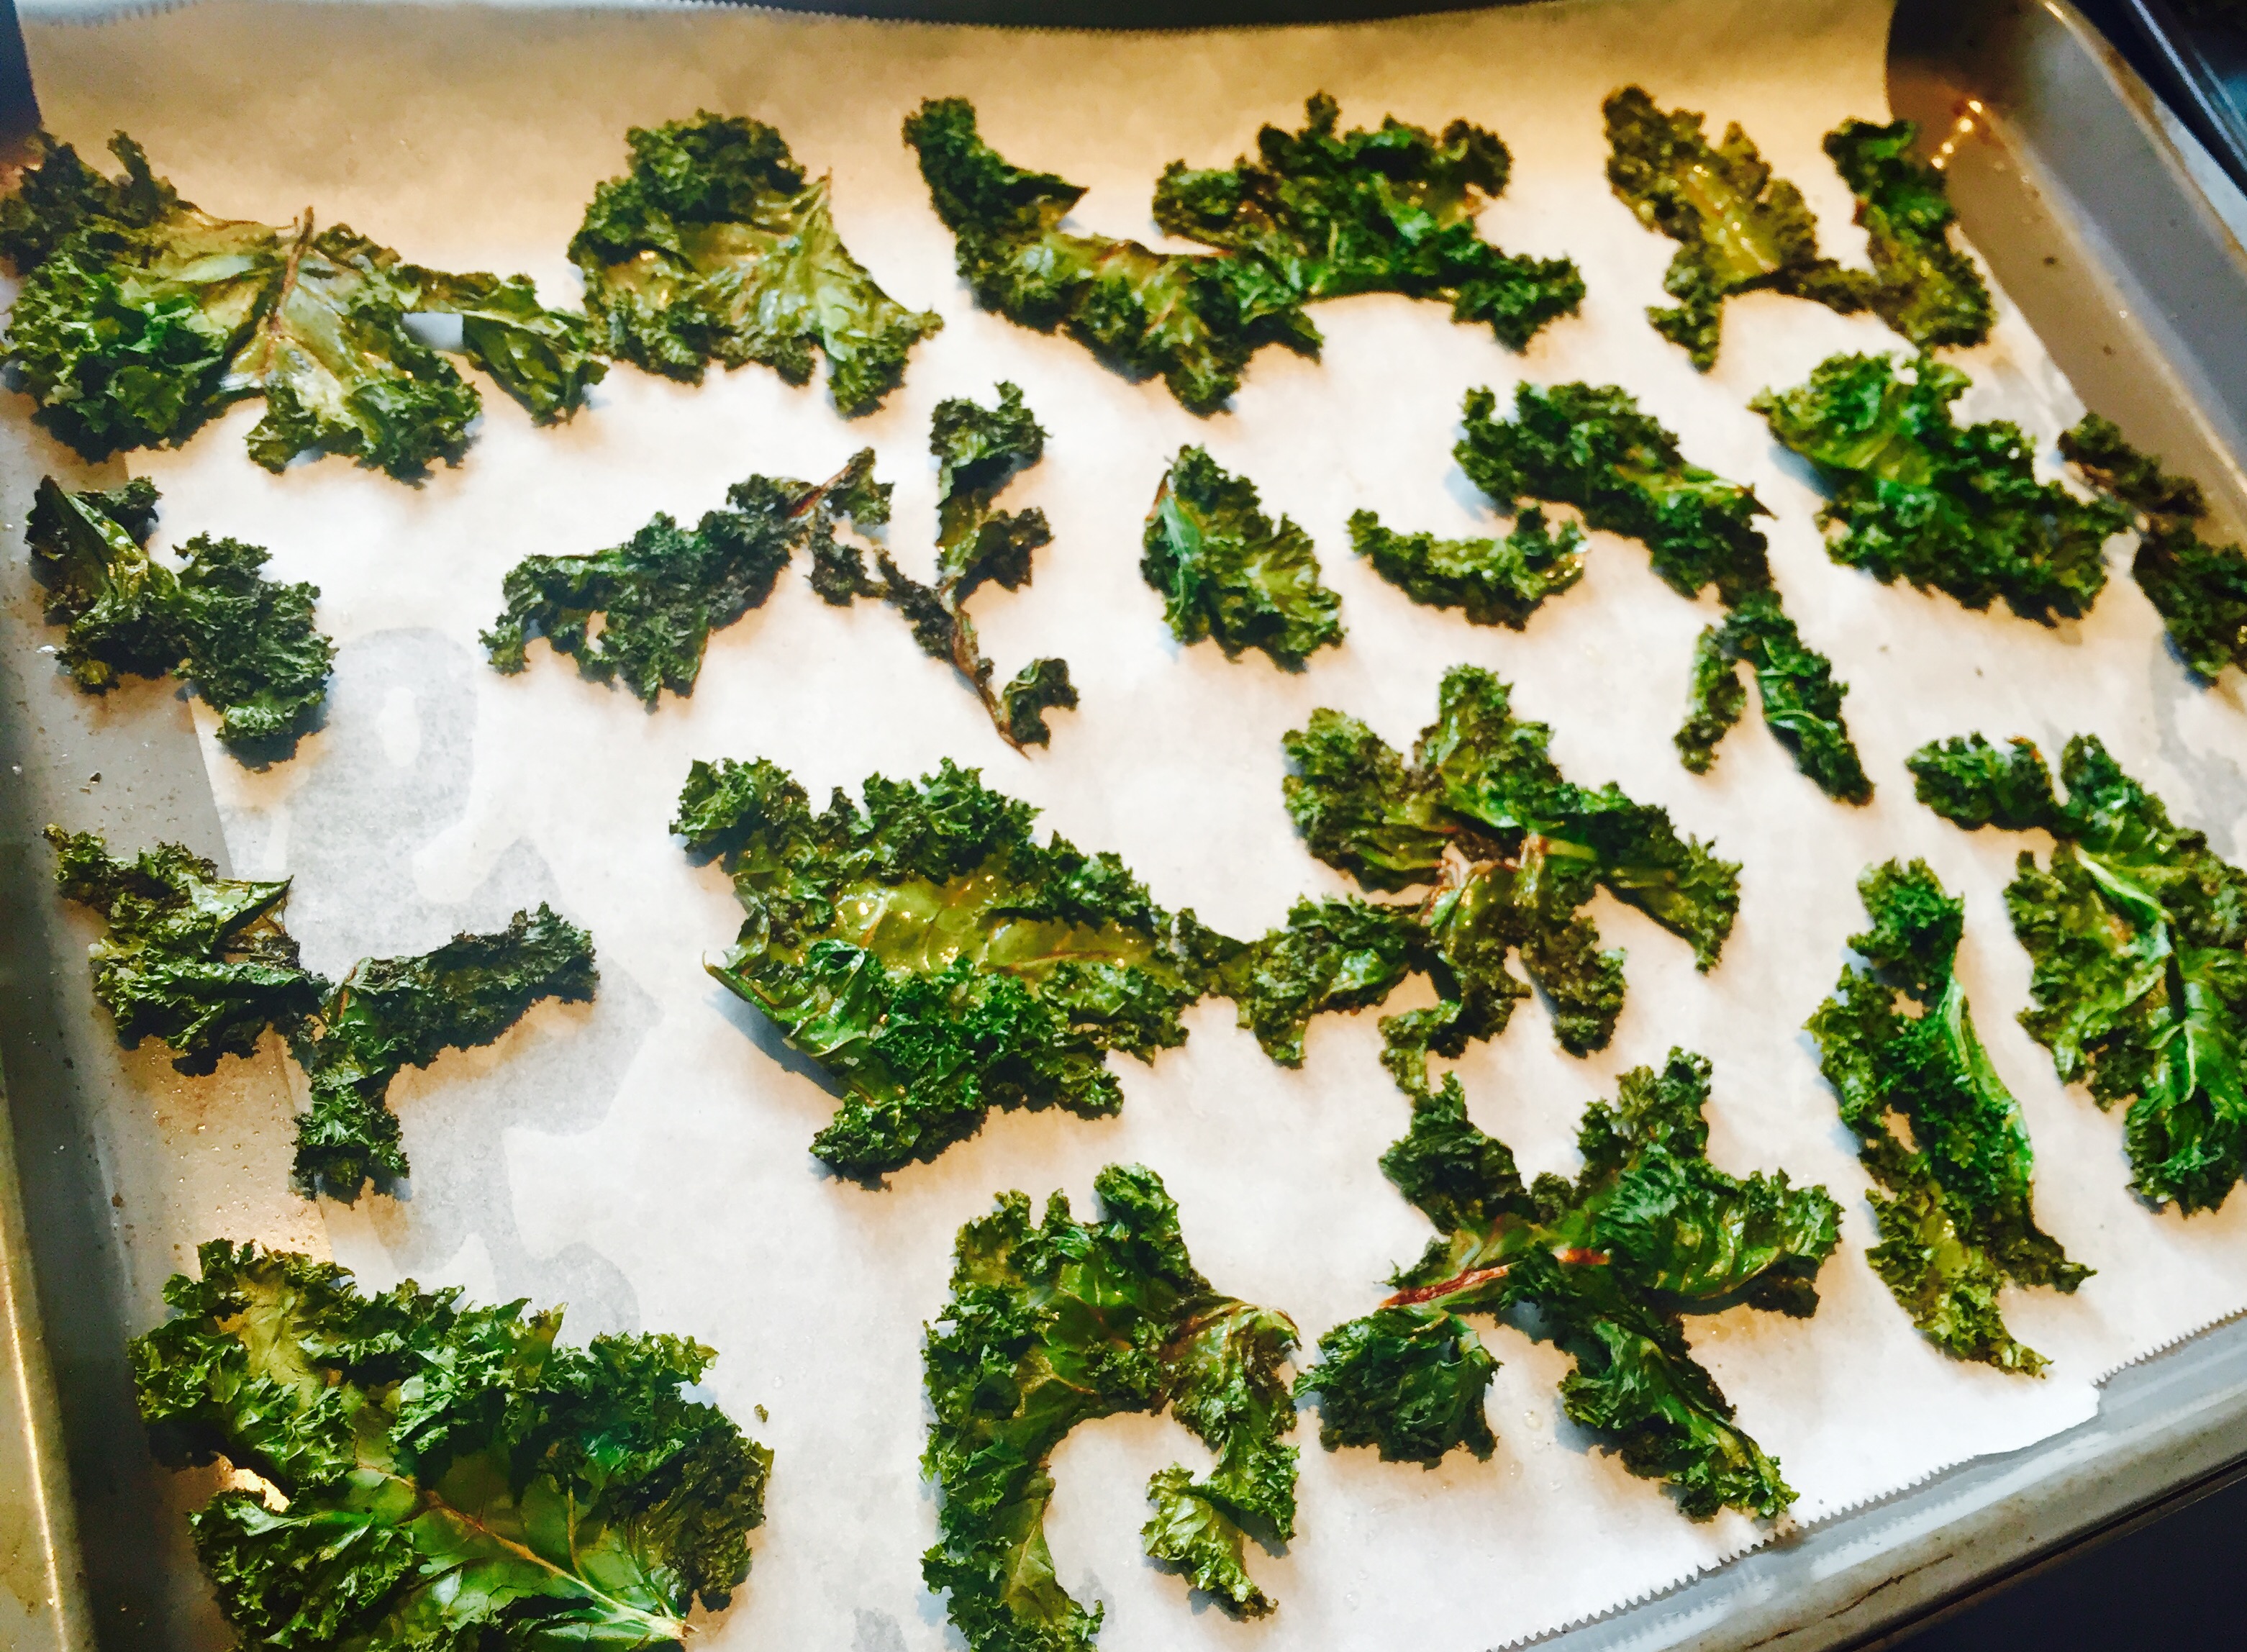 Lovely roasted Kale with sea salt and a little olive oil